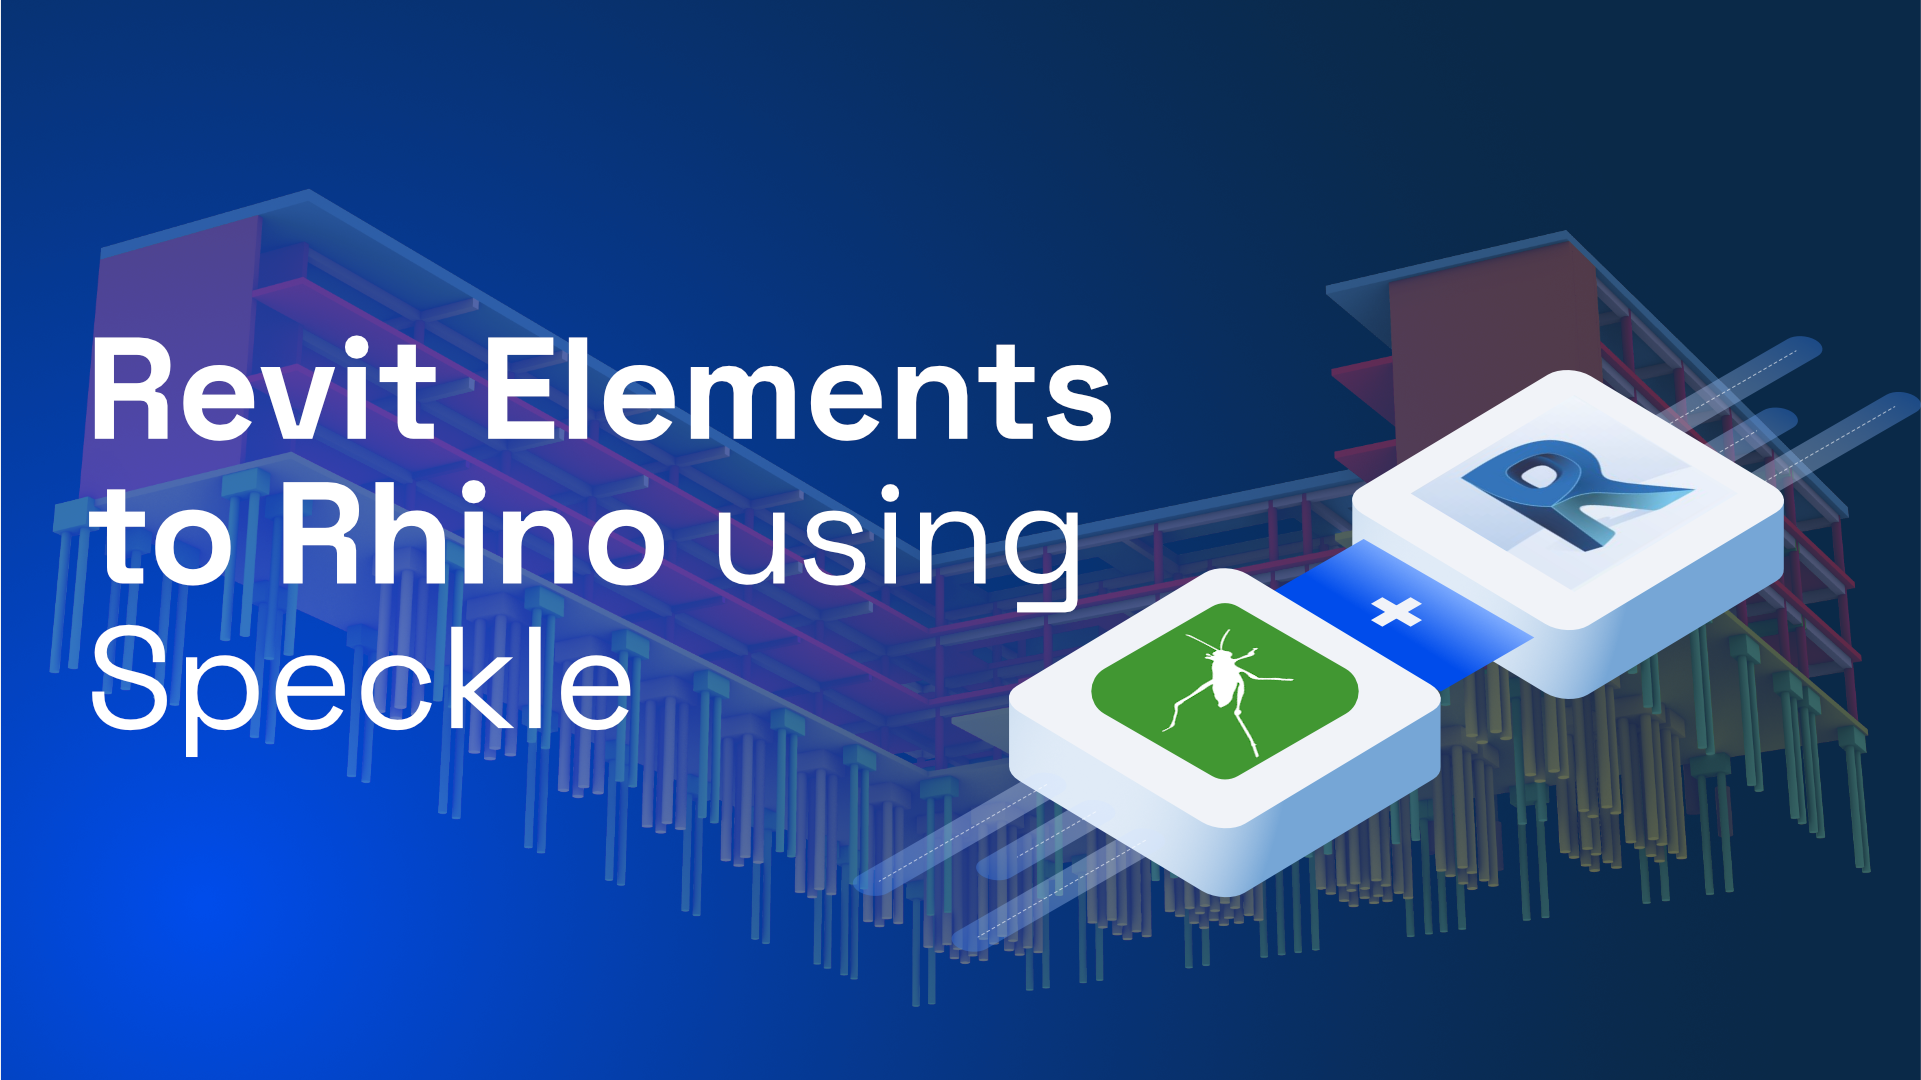 Revit Elements to Rhino using Speckle